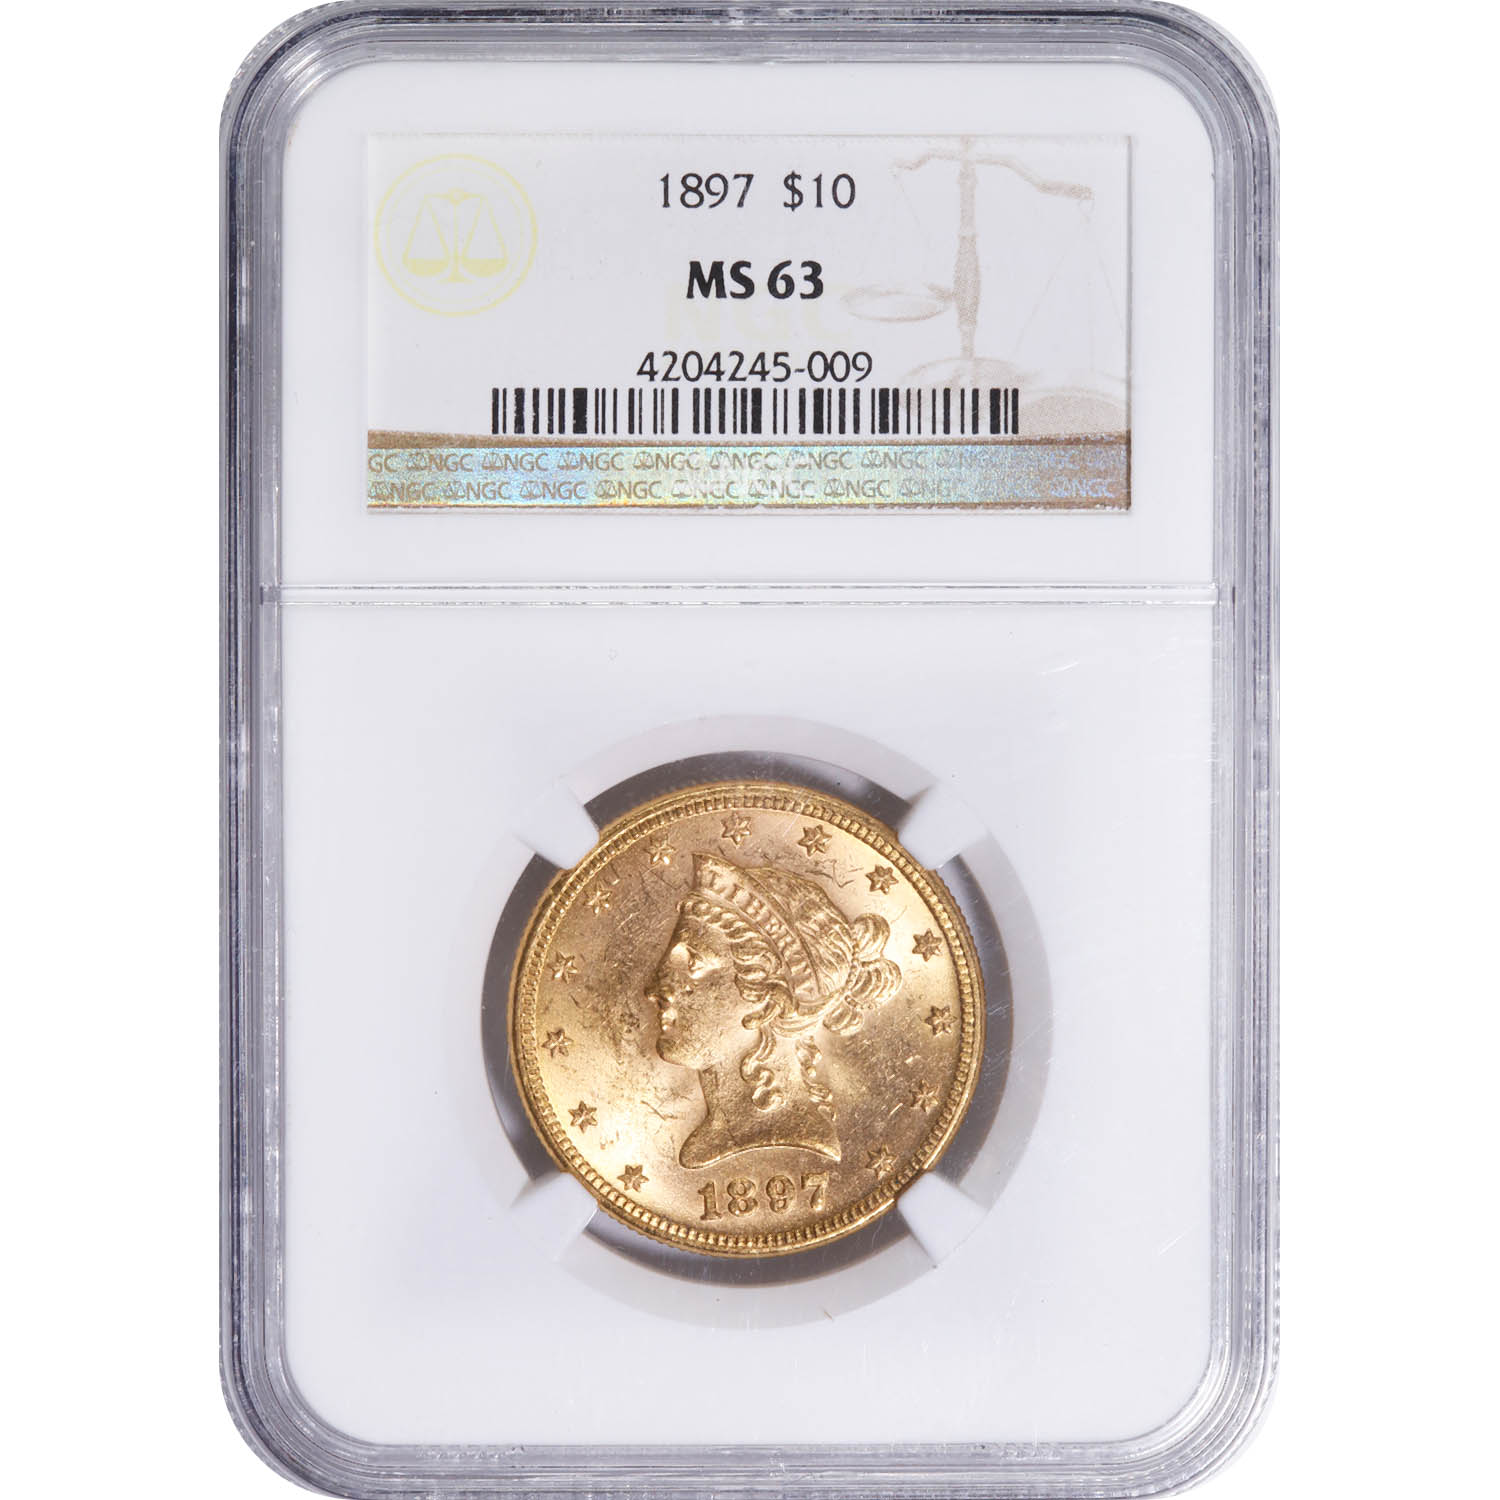 Certified US Gold $10 Liberty 1897 MS63 NGC